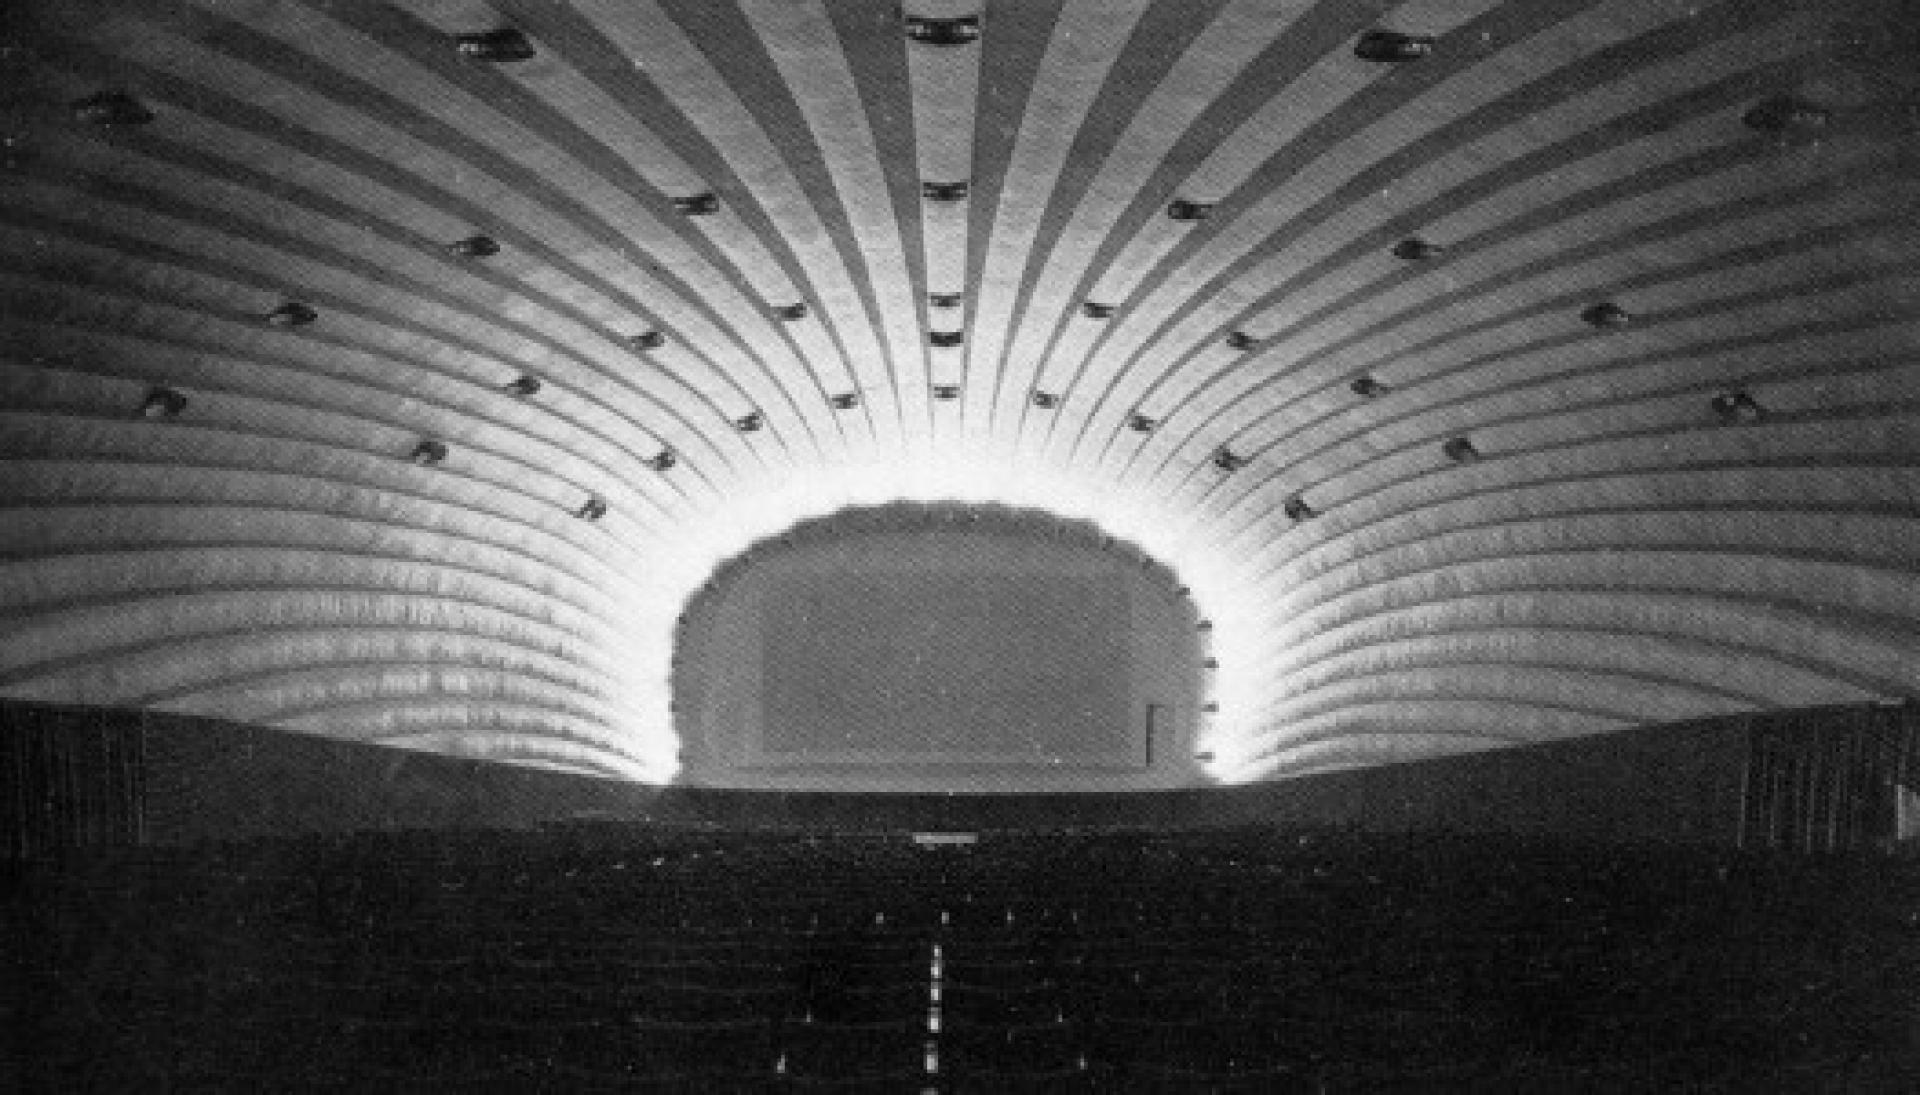 Cinema Airone with its design of the ovoid shape. | Photo © ArchiDiAP